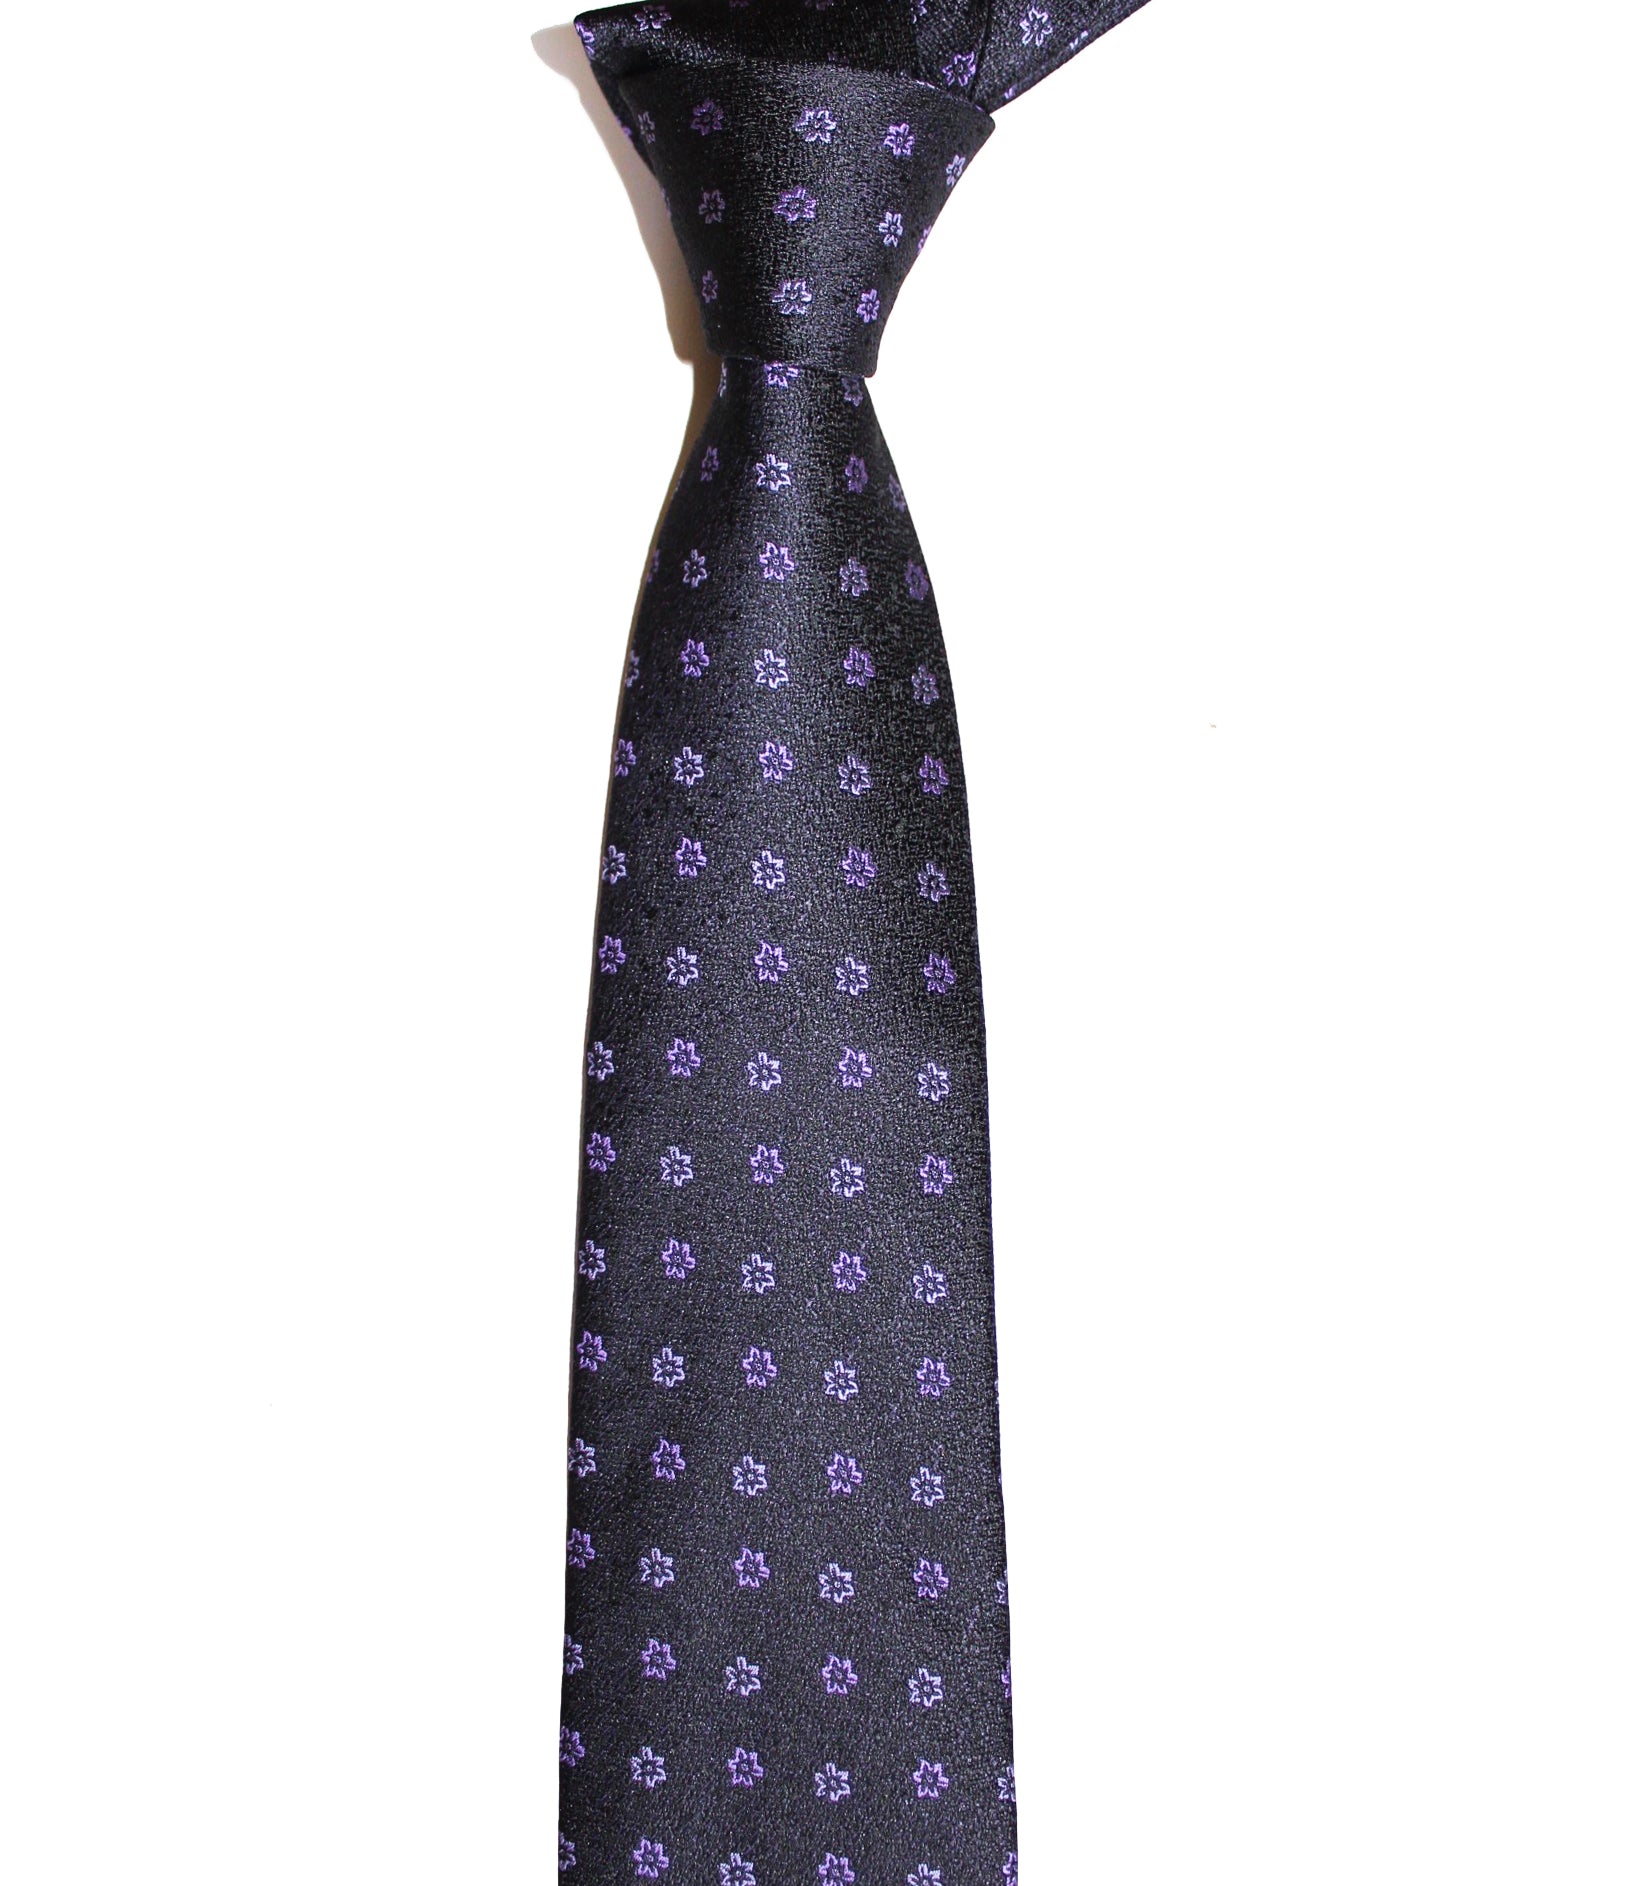 Ying Cai Norrian Tie /Black 1